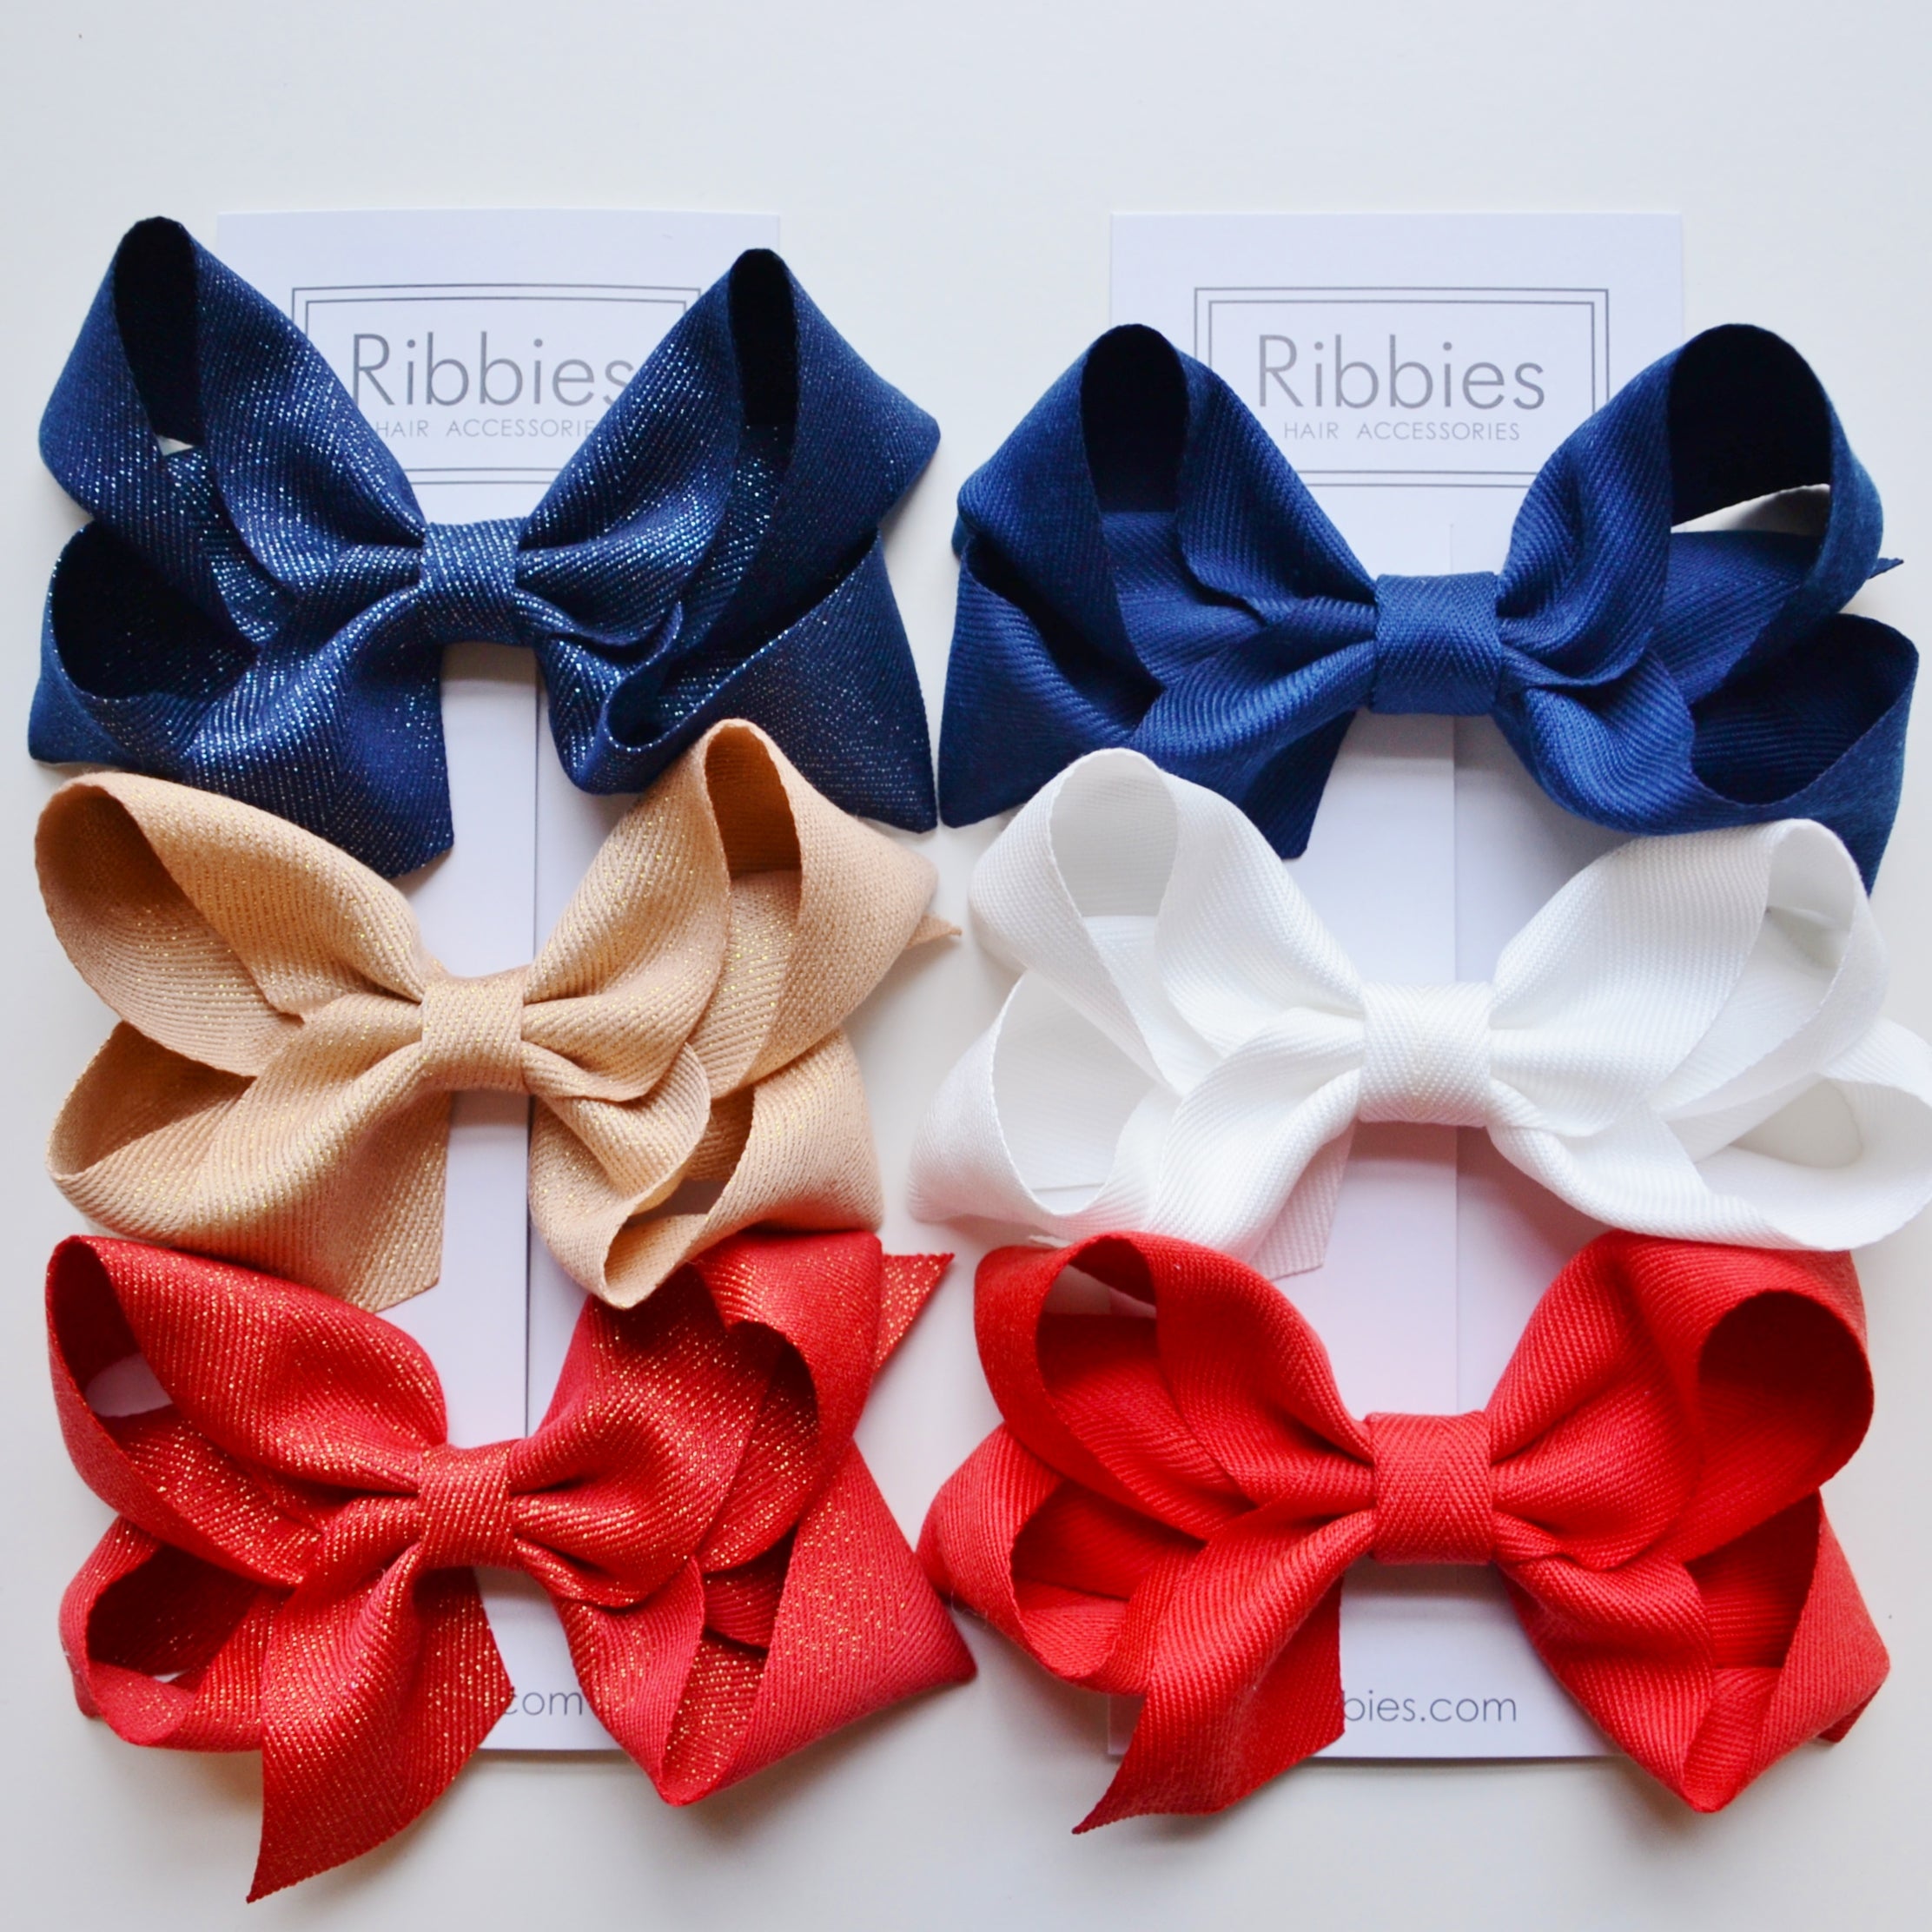 Extra Large Sparkly Hair Bows - Navy, Gold & Red - Set of 3